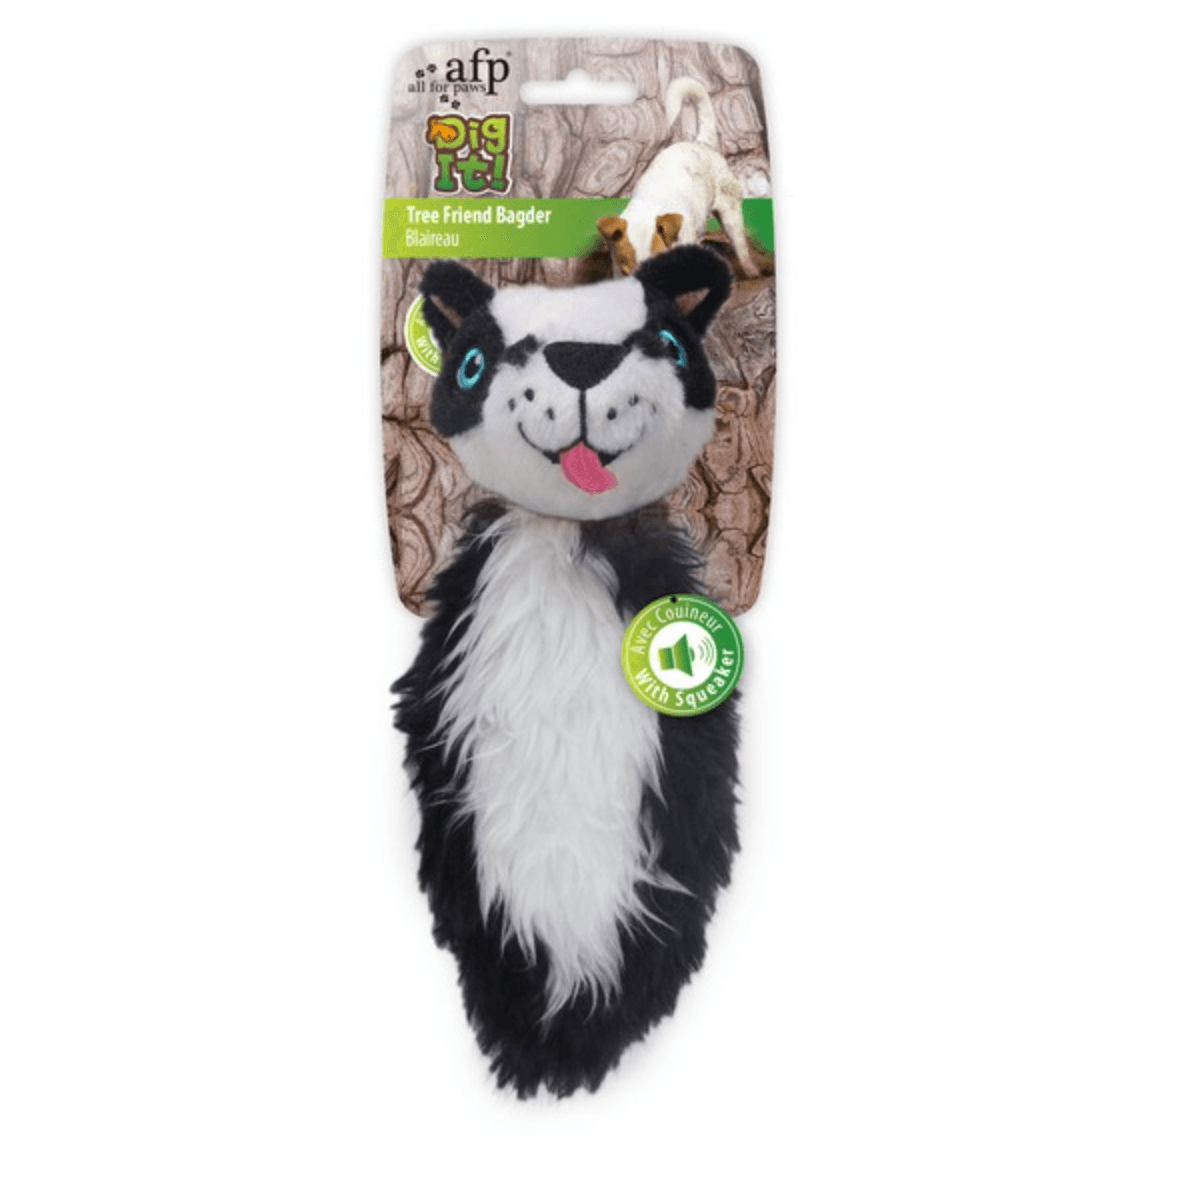 All For Paws Dig It Tree Friend Badger - Pet's Play Toy Store